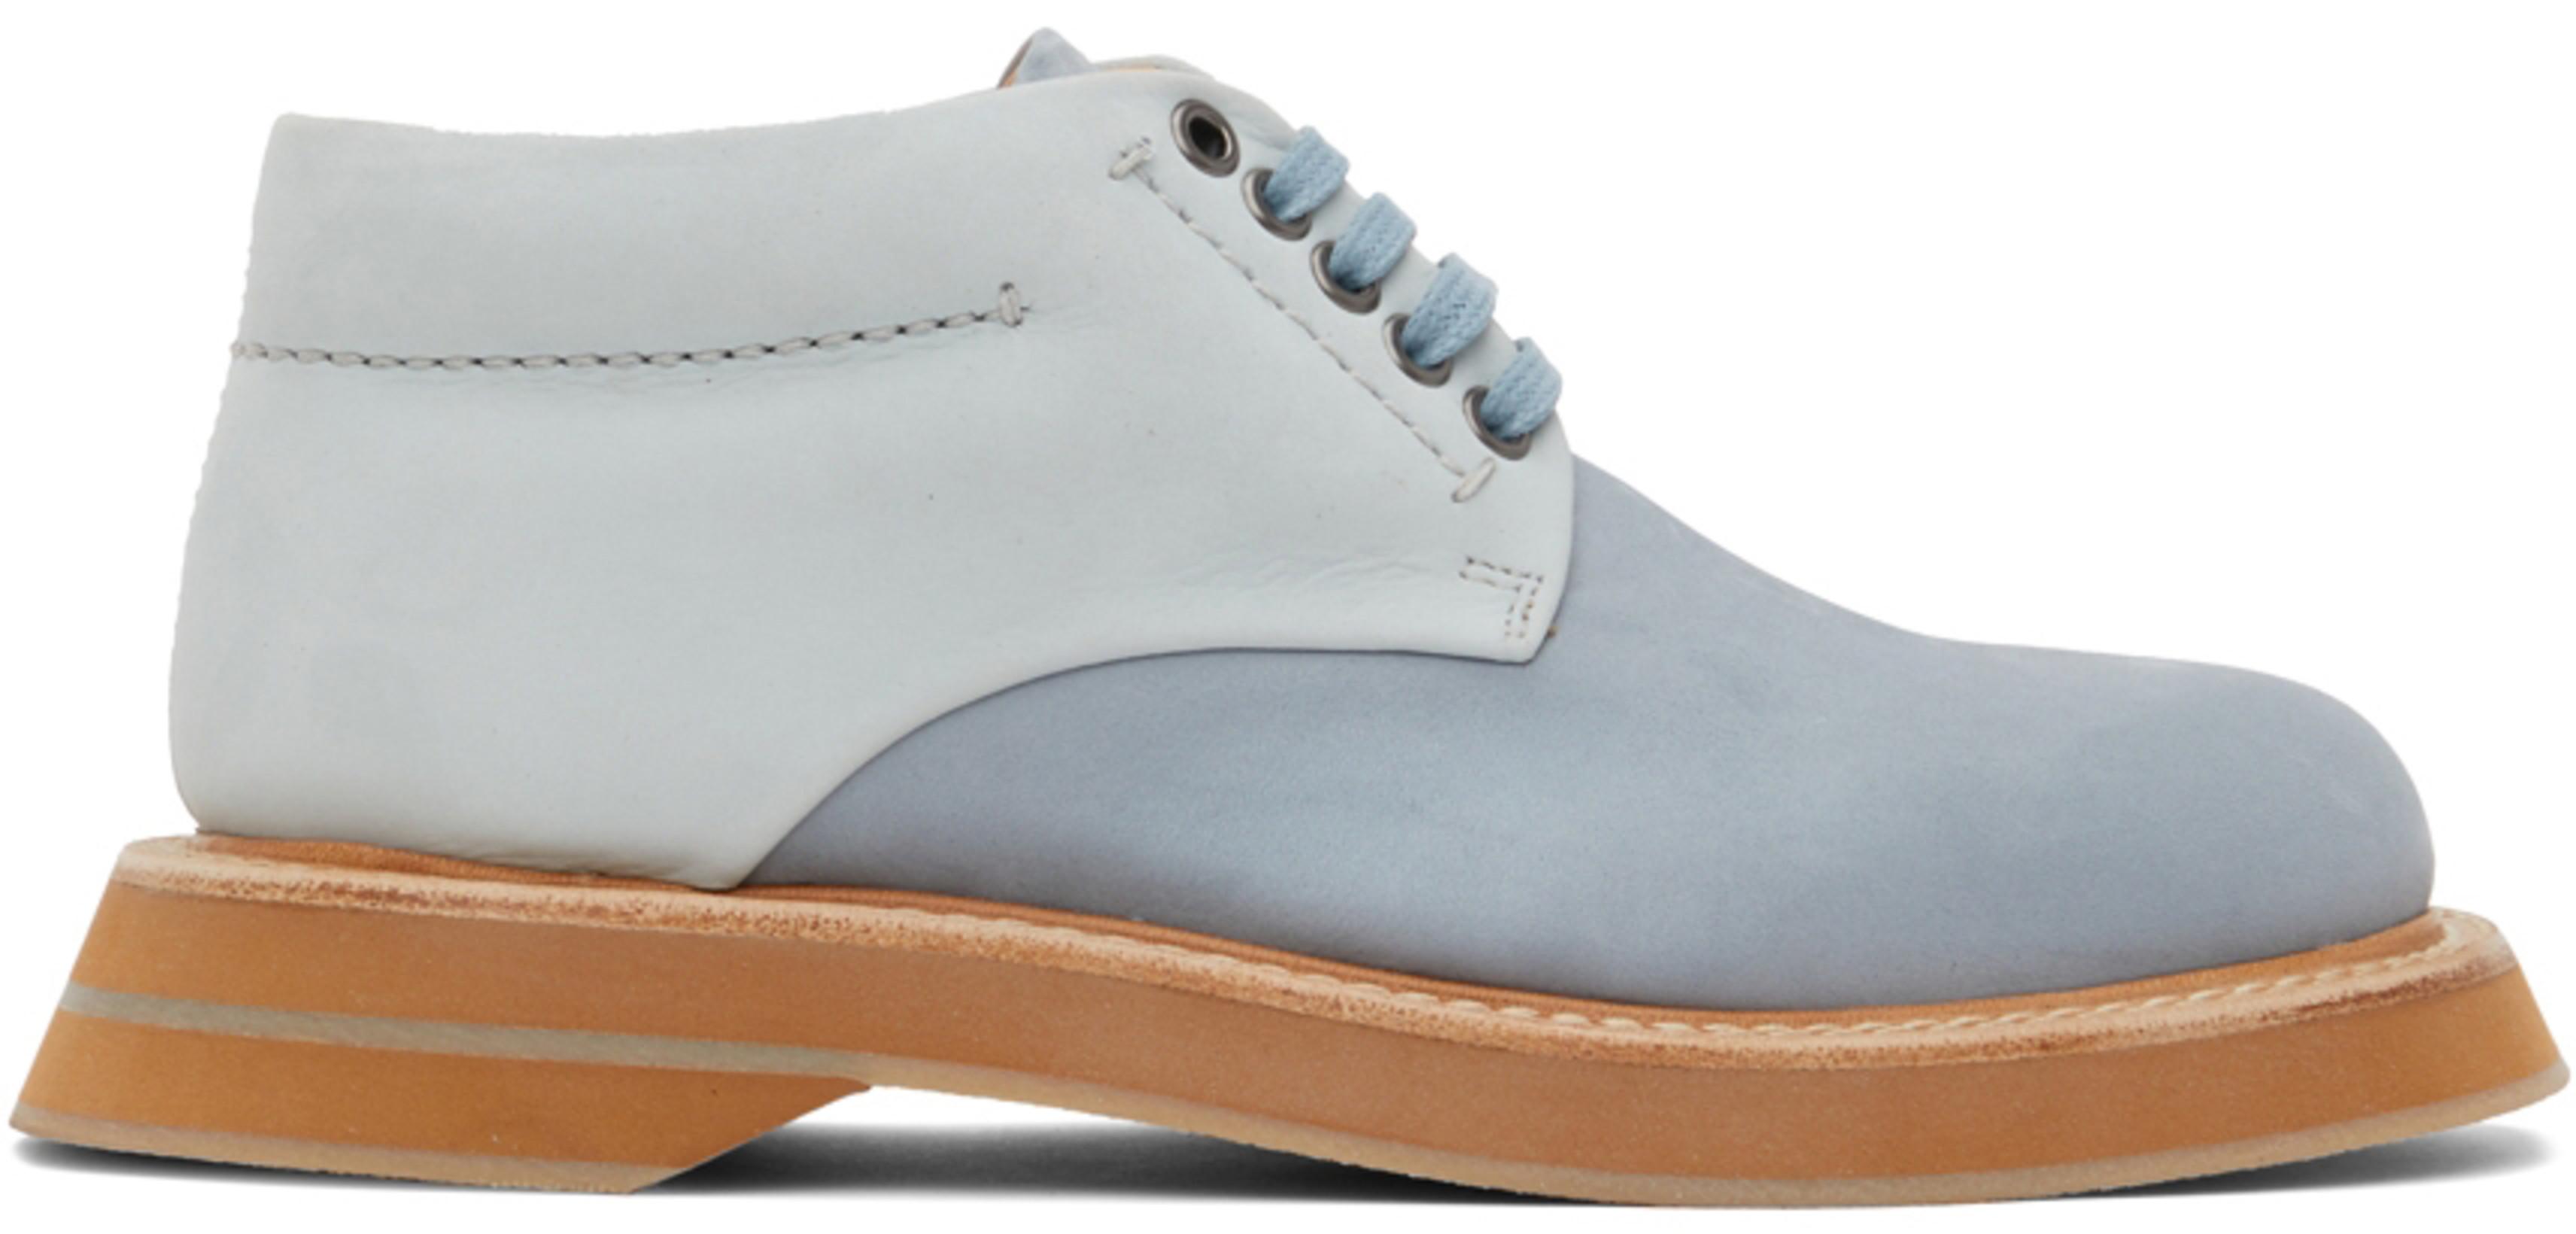 Blue 'Les Chaussures Bricolo' Lace-Up Work Boots by JACQUEMUS